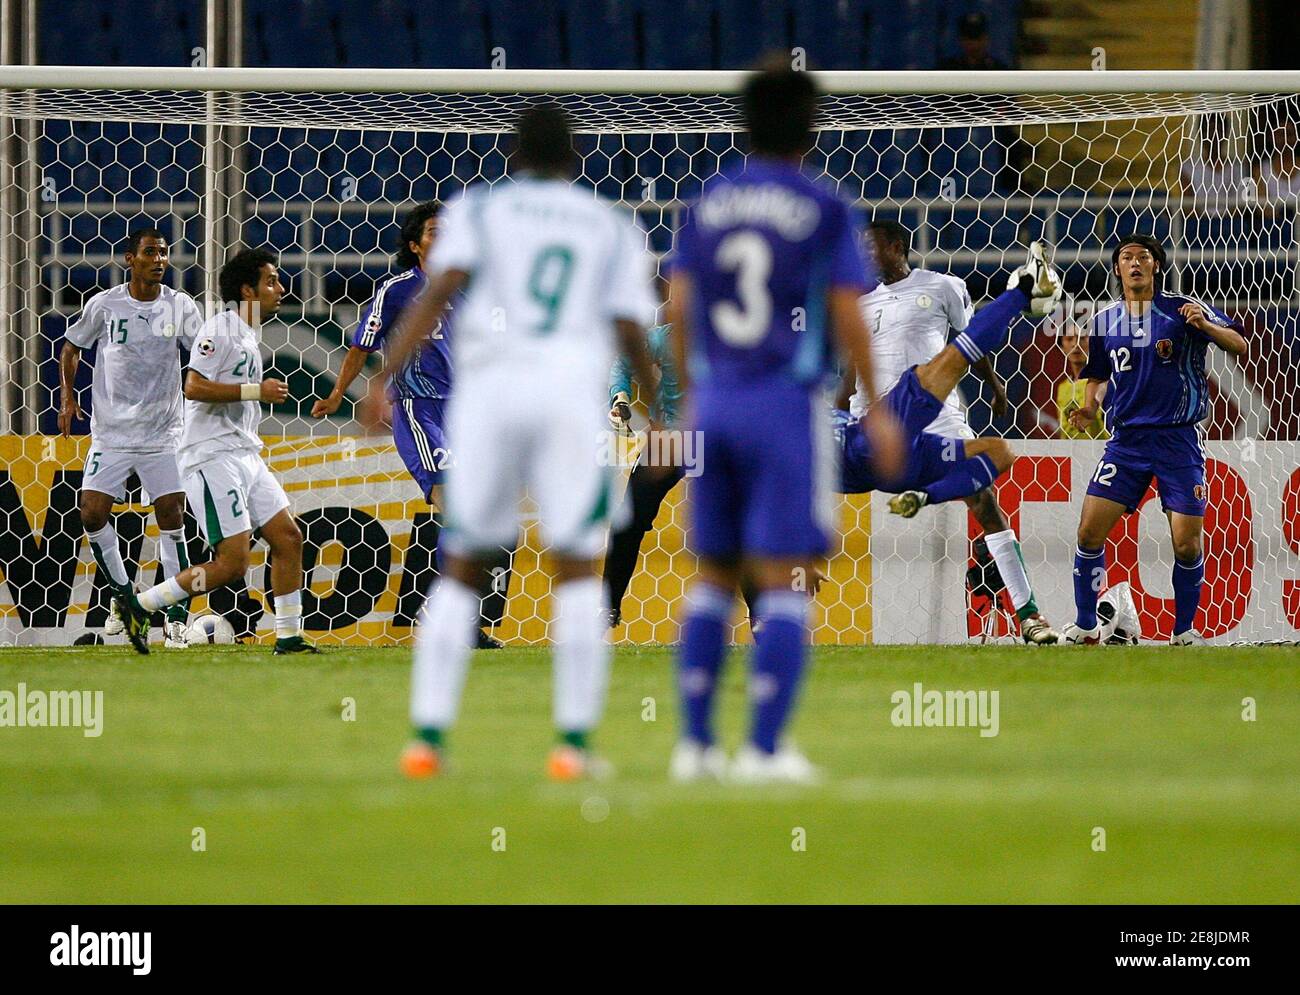 Japan's Yuki Abe (C, partially obscured) kicks to score a goal against Saudi Arabia during their semi-final match at the 2007 AFC Asian Cup soccer tournament at My Dinh Stadium in Hanoi July 25, 2007.  REUTERS/Jerry Lampen (VIETNAM) Stock Photo